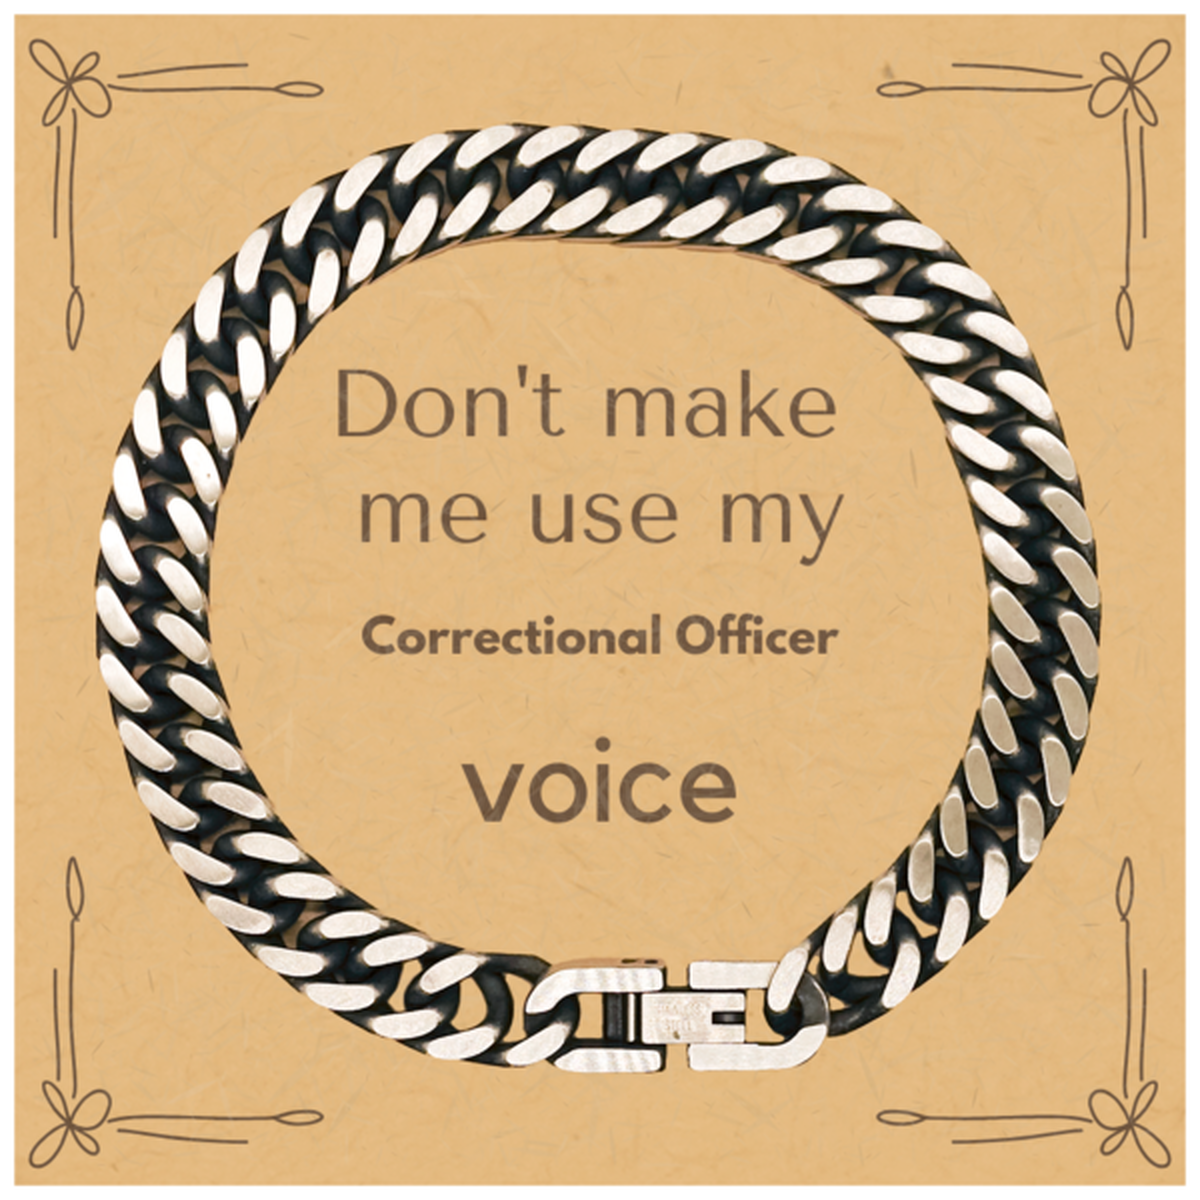 Don't make me use my Correctional Officer voice, Sarcasm Correctional Officer Card Gifts, Christmas Correctional Officer Cuban Link Chain Bracelet Birthday Unique Gifts For Correctional Officer Coworkers, Men, Women, Colleague, Friends